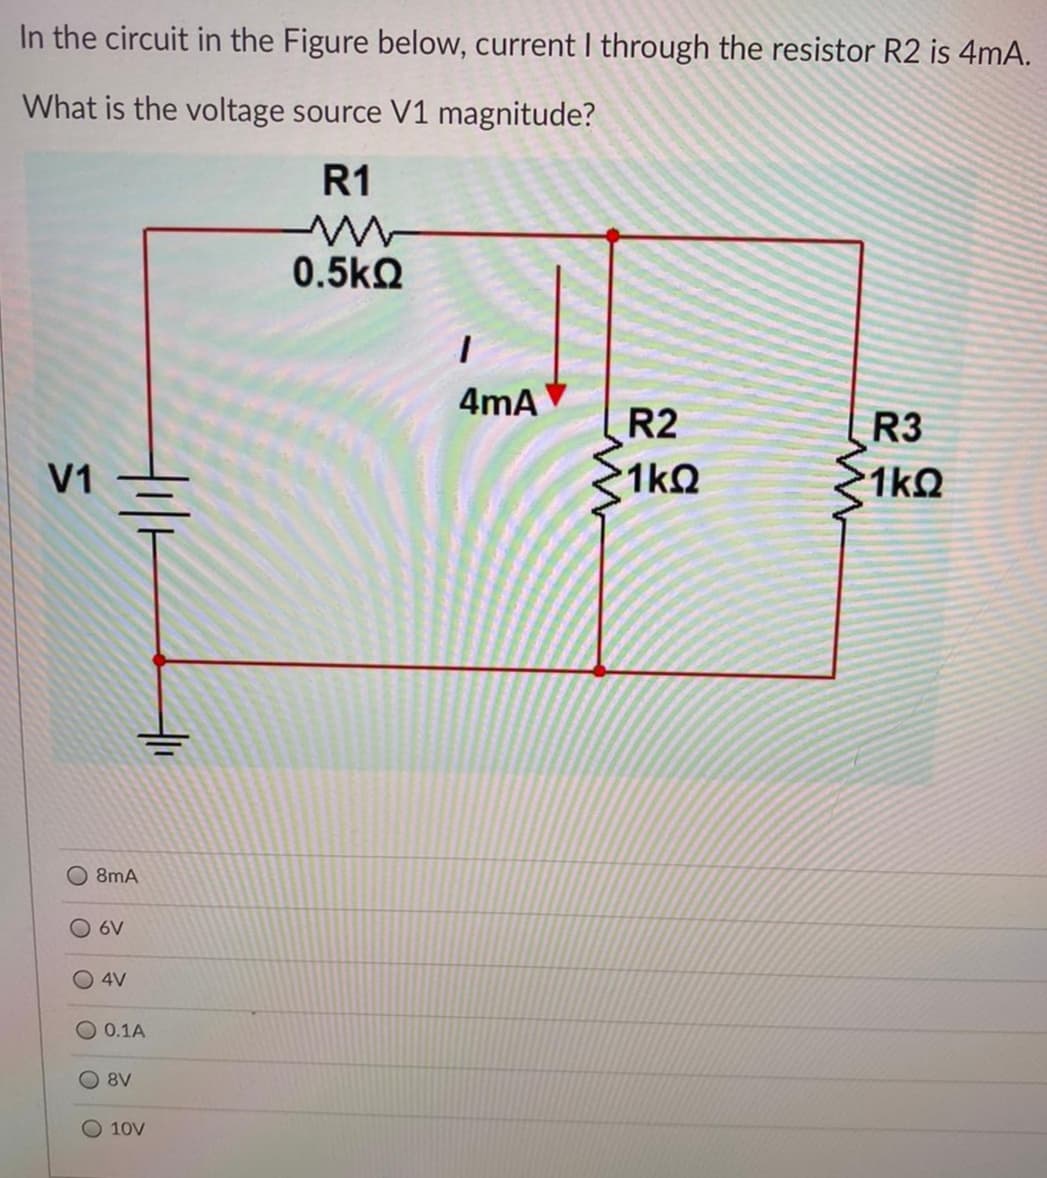 In the circuit in the Figure below, current I through the resistor R2 is 4mA.
What is the voltage source V1 magnitude?
R1
0.5kQ
4mA
R2
R3
V1
1kQ
1kQ
O 8mA
6V
O 4V
O 0.1A
8V
10V
